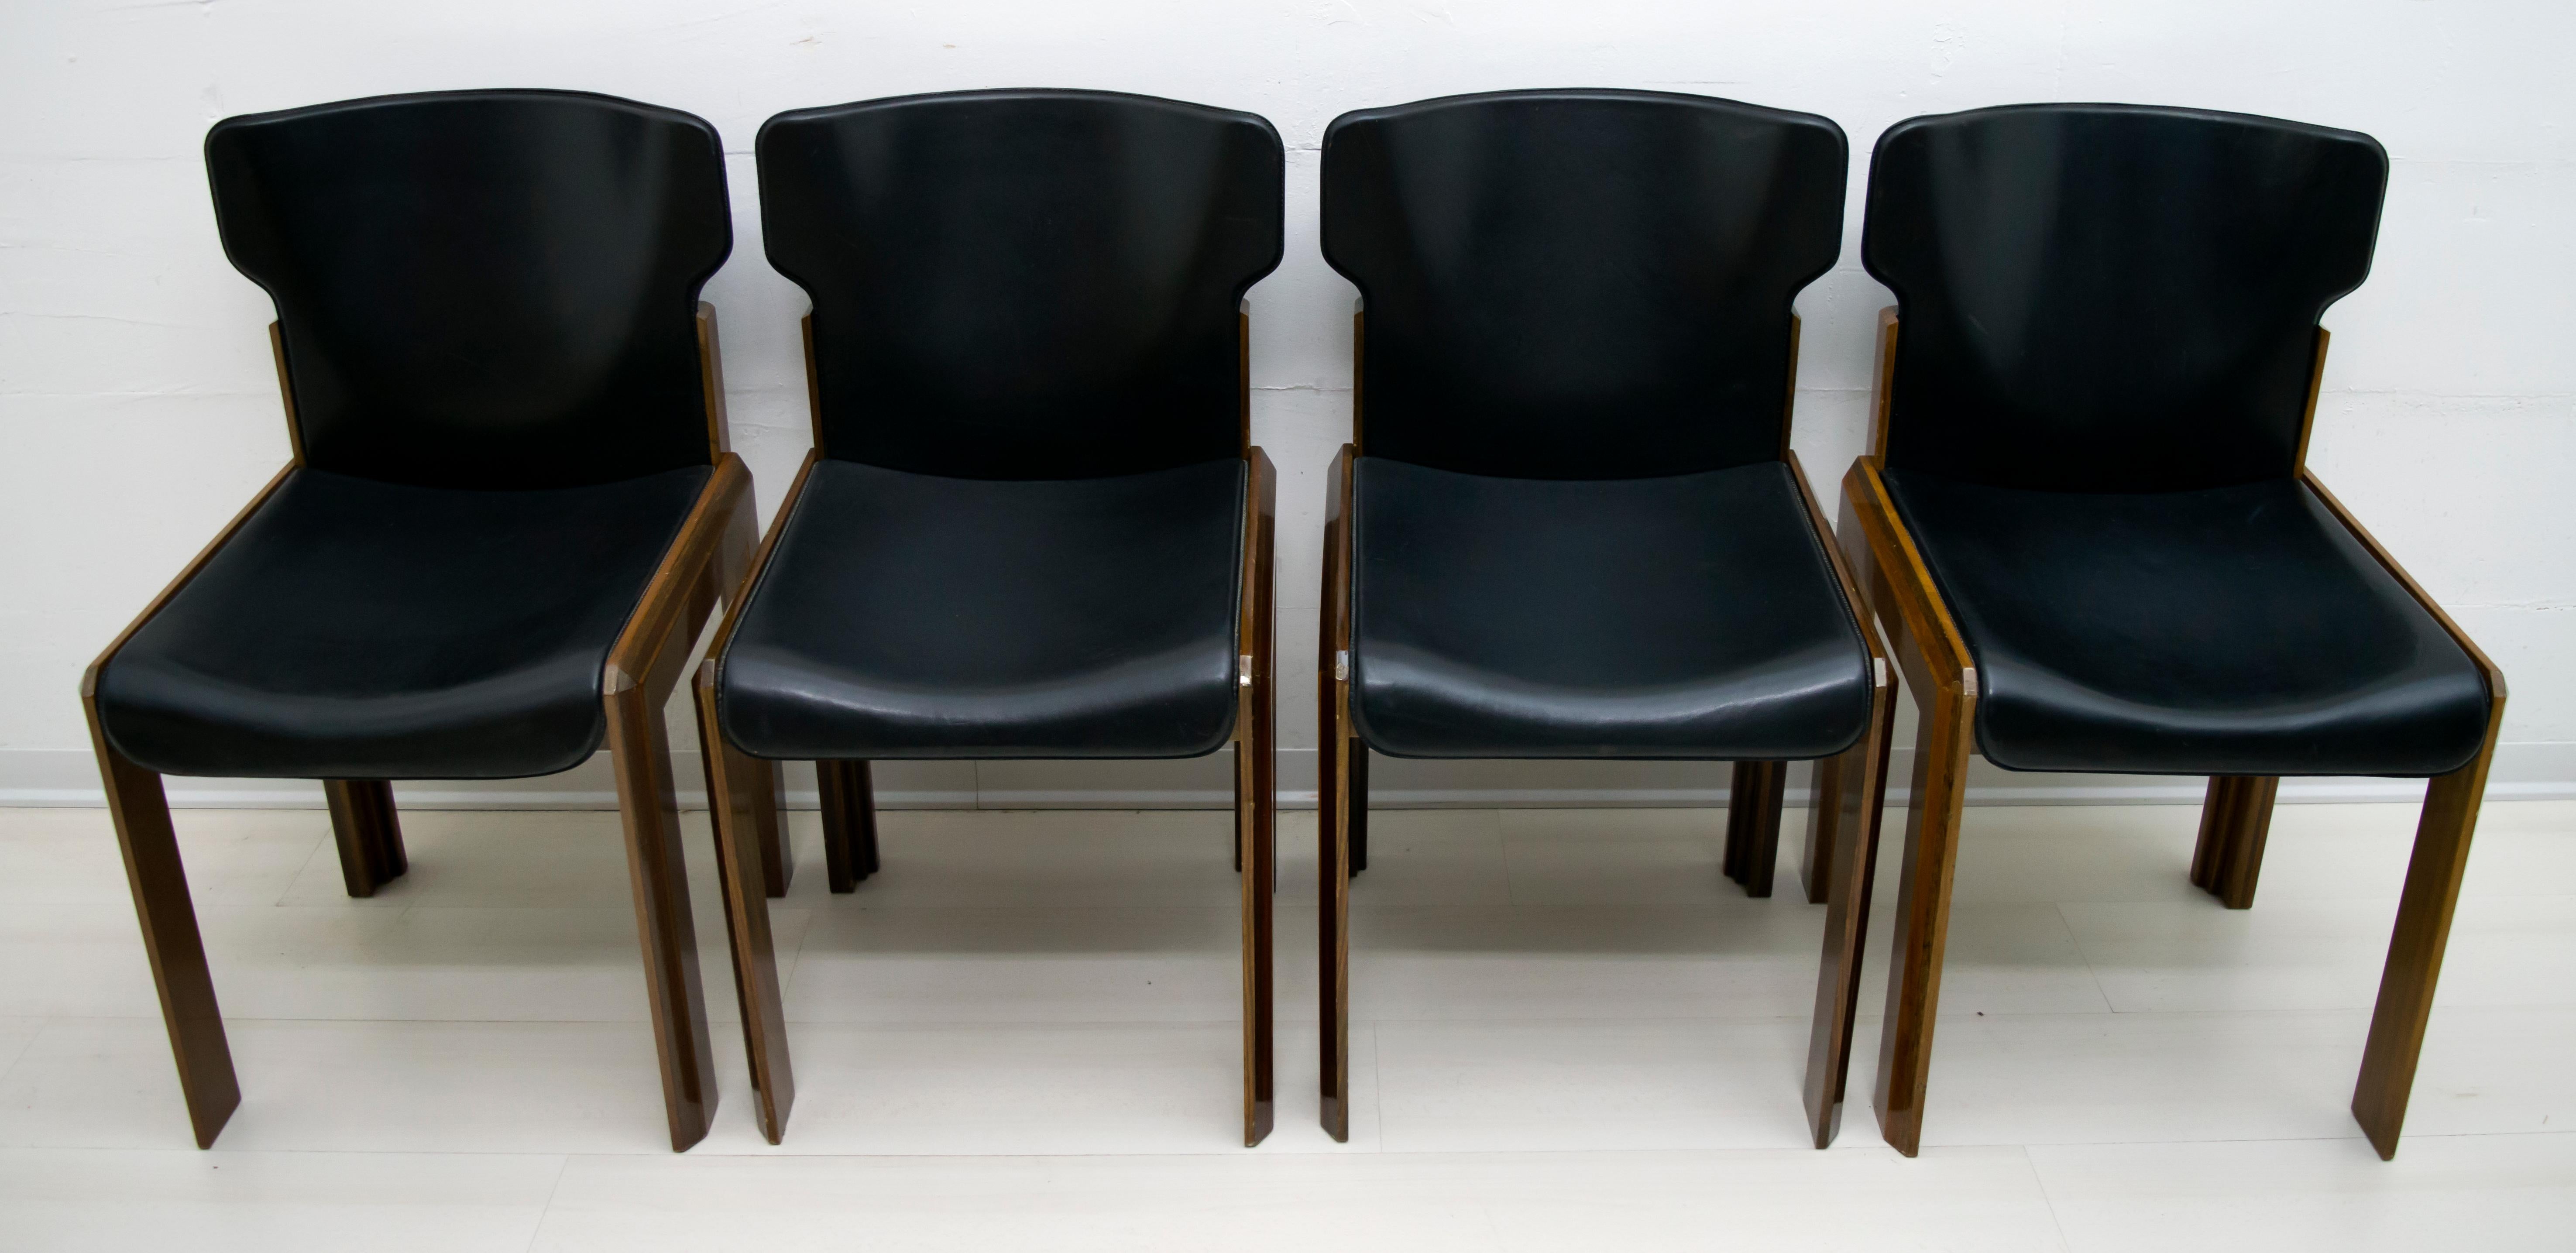 Luciano Frigerio Italian Modern Leather Dining Chairs, 1980s 6